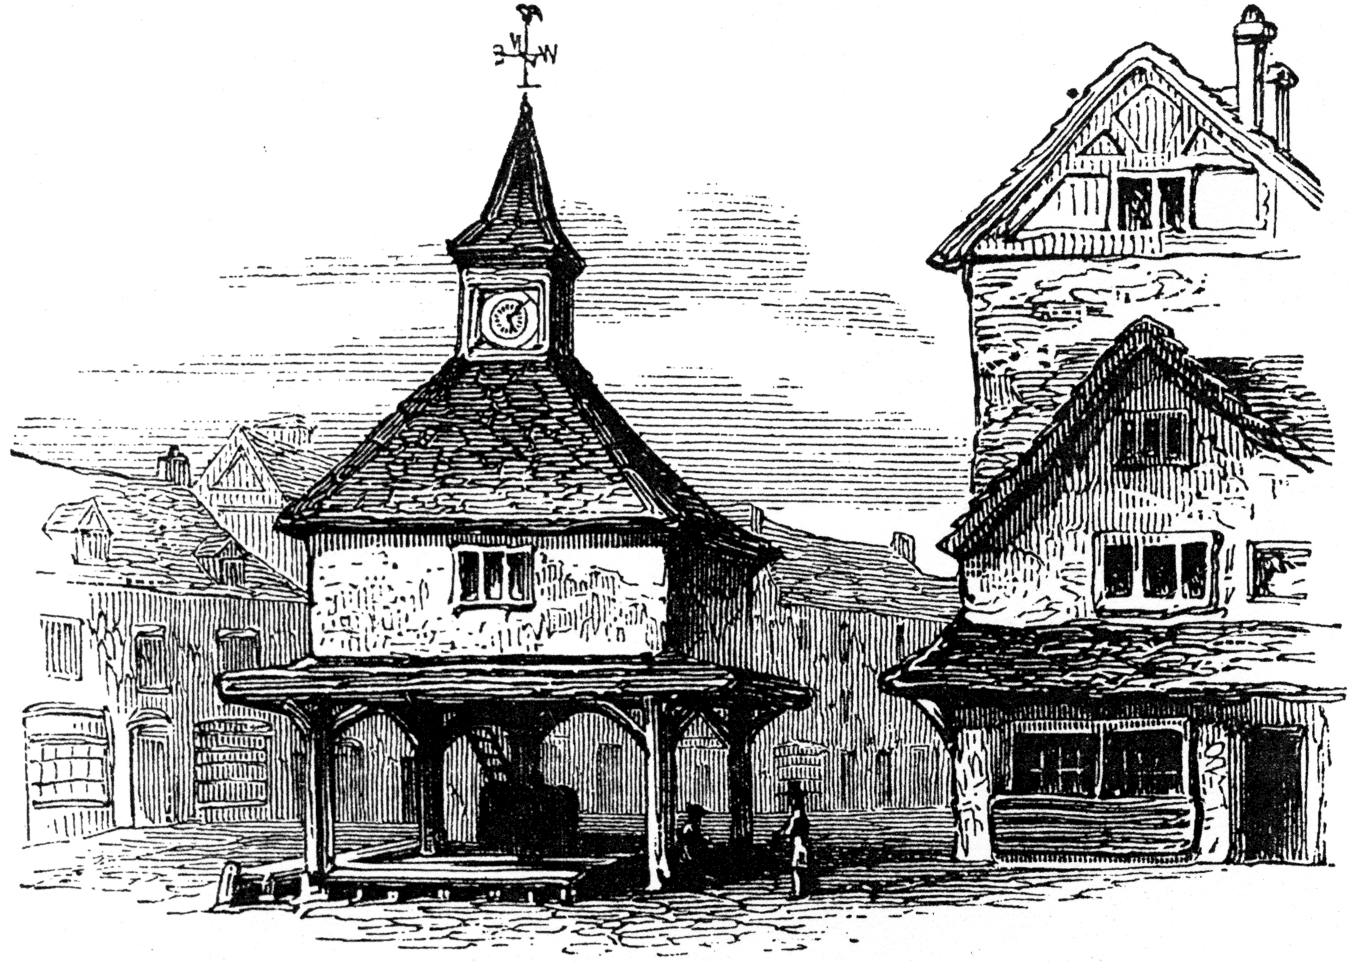 Market cross, Stratford-upon-Avon, now pulled down. From James Halliwell 'The Life of William Shakespeare', 1848, page 219. Original published size 8.3cm wide by 6cm high.